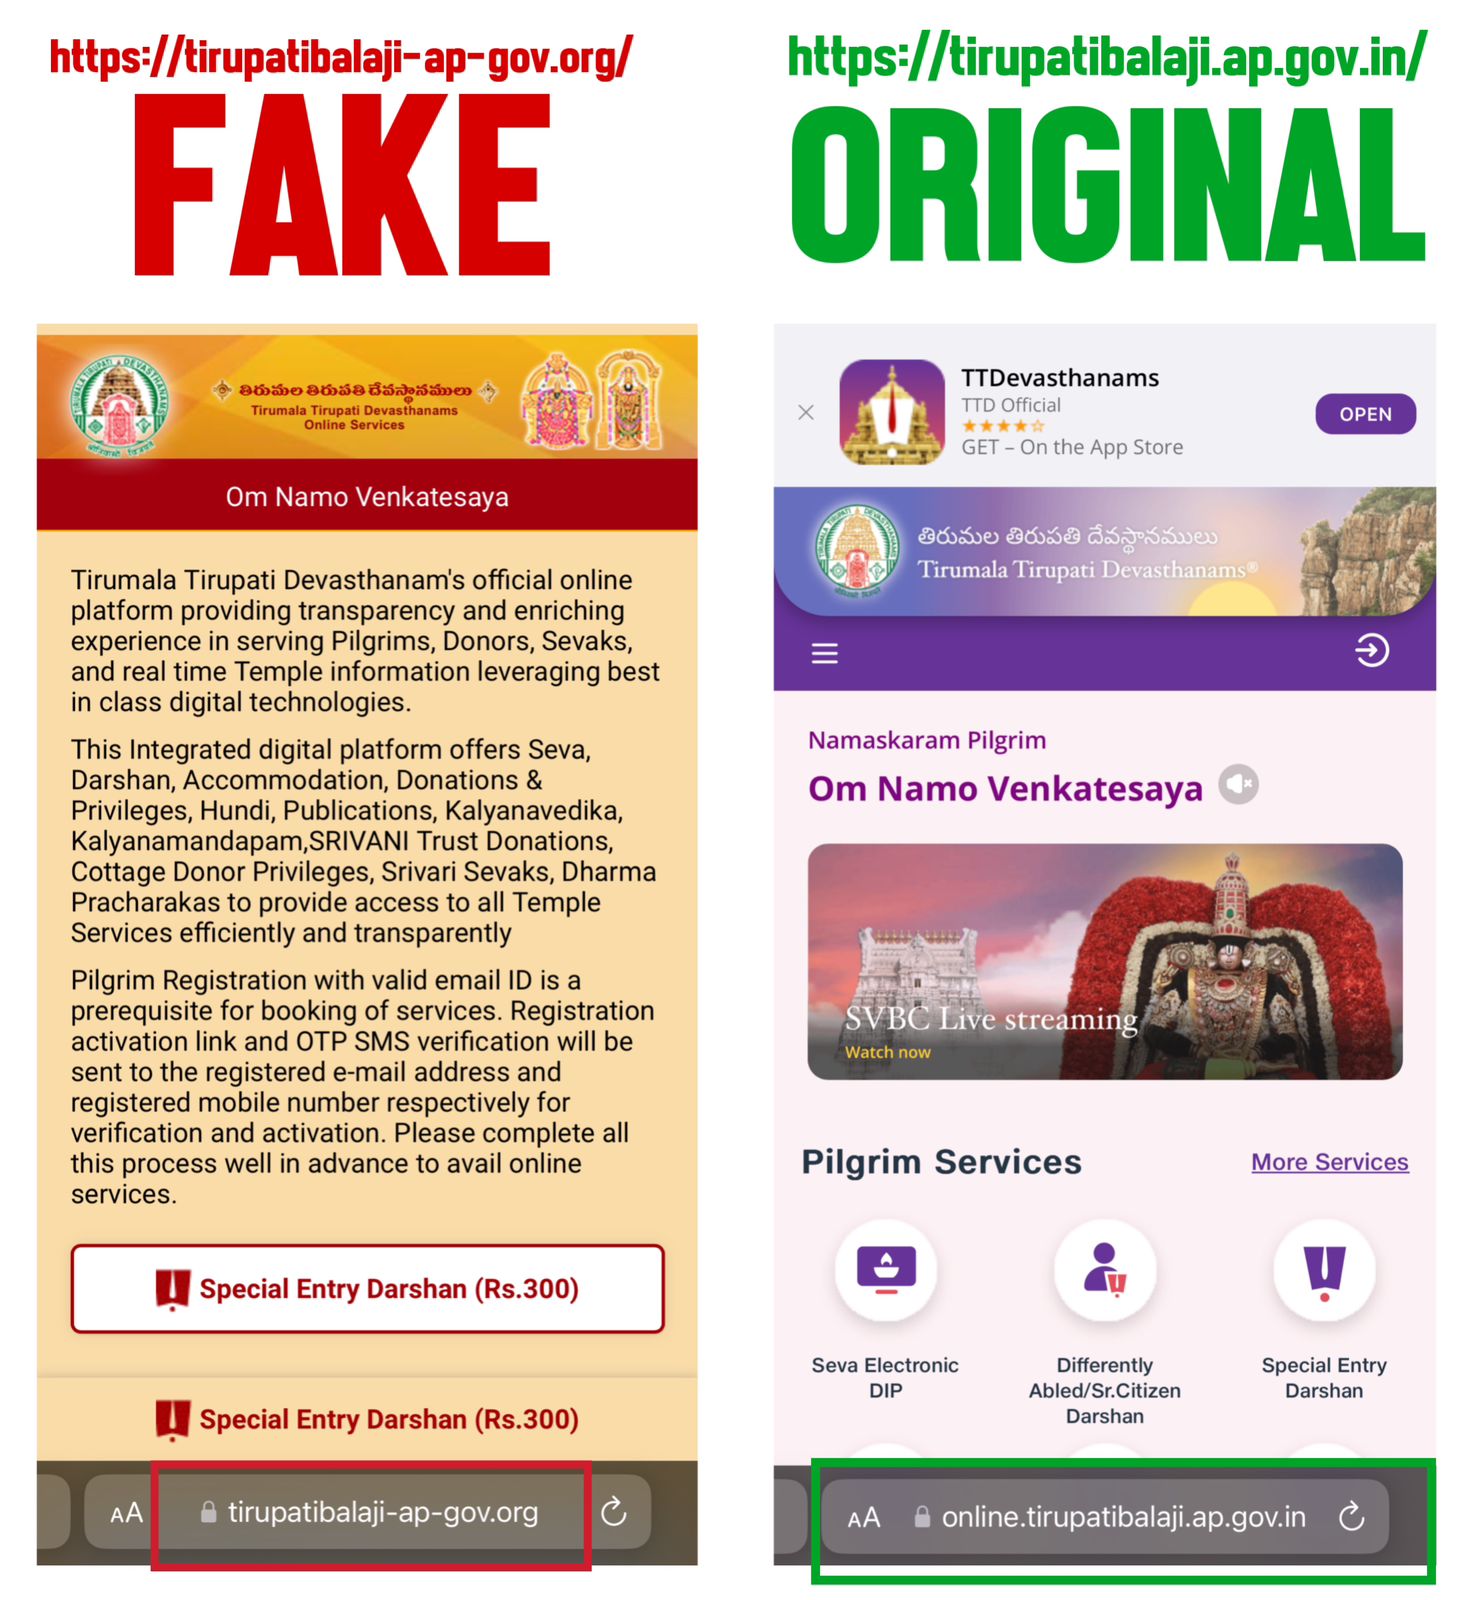 Be Careful with FAKE Website of TTD